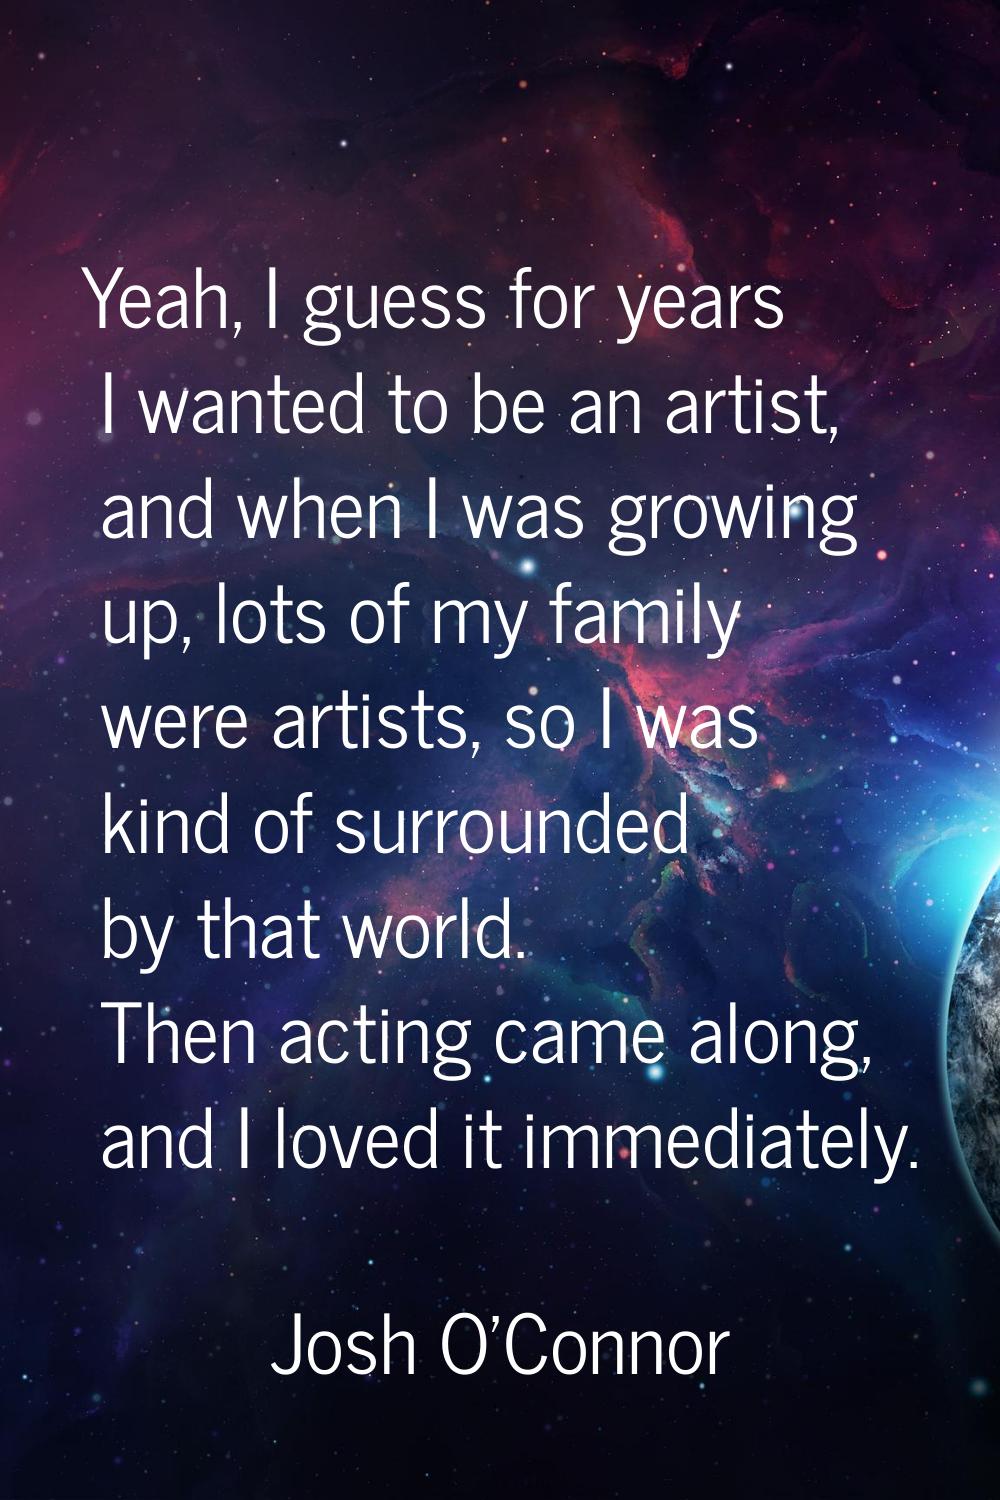 Yeah, I guess for years I wanted to be an artist, and when I was growing up, lots of my family were